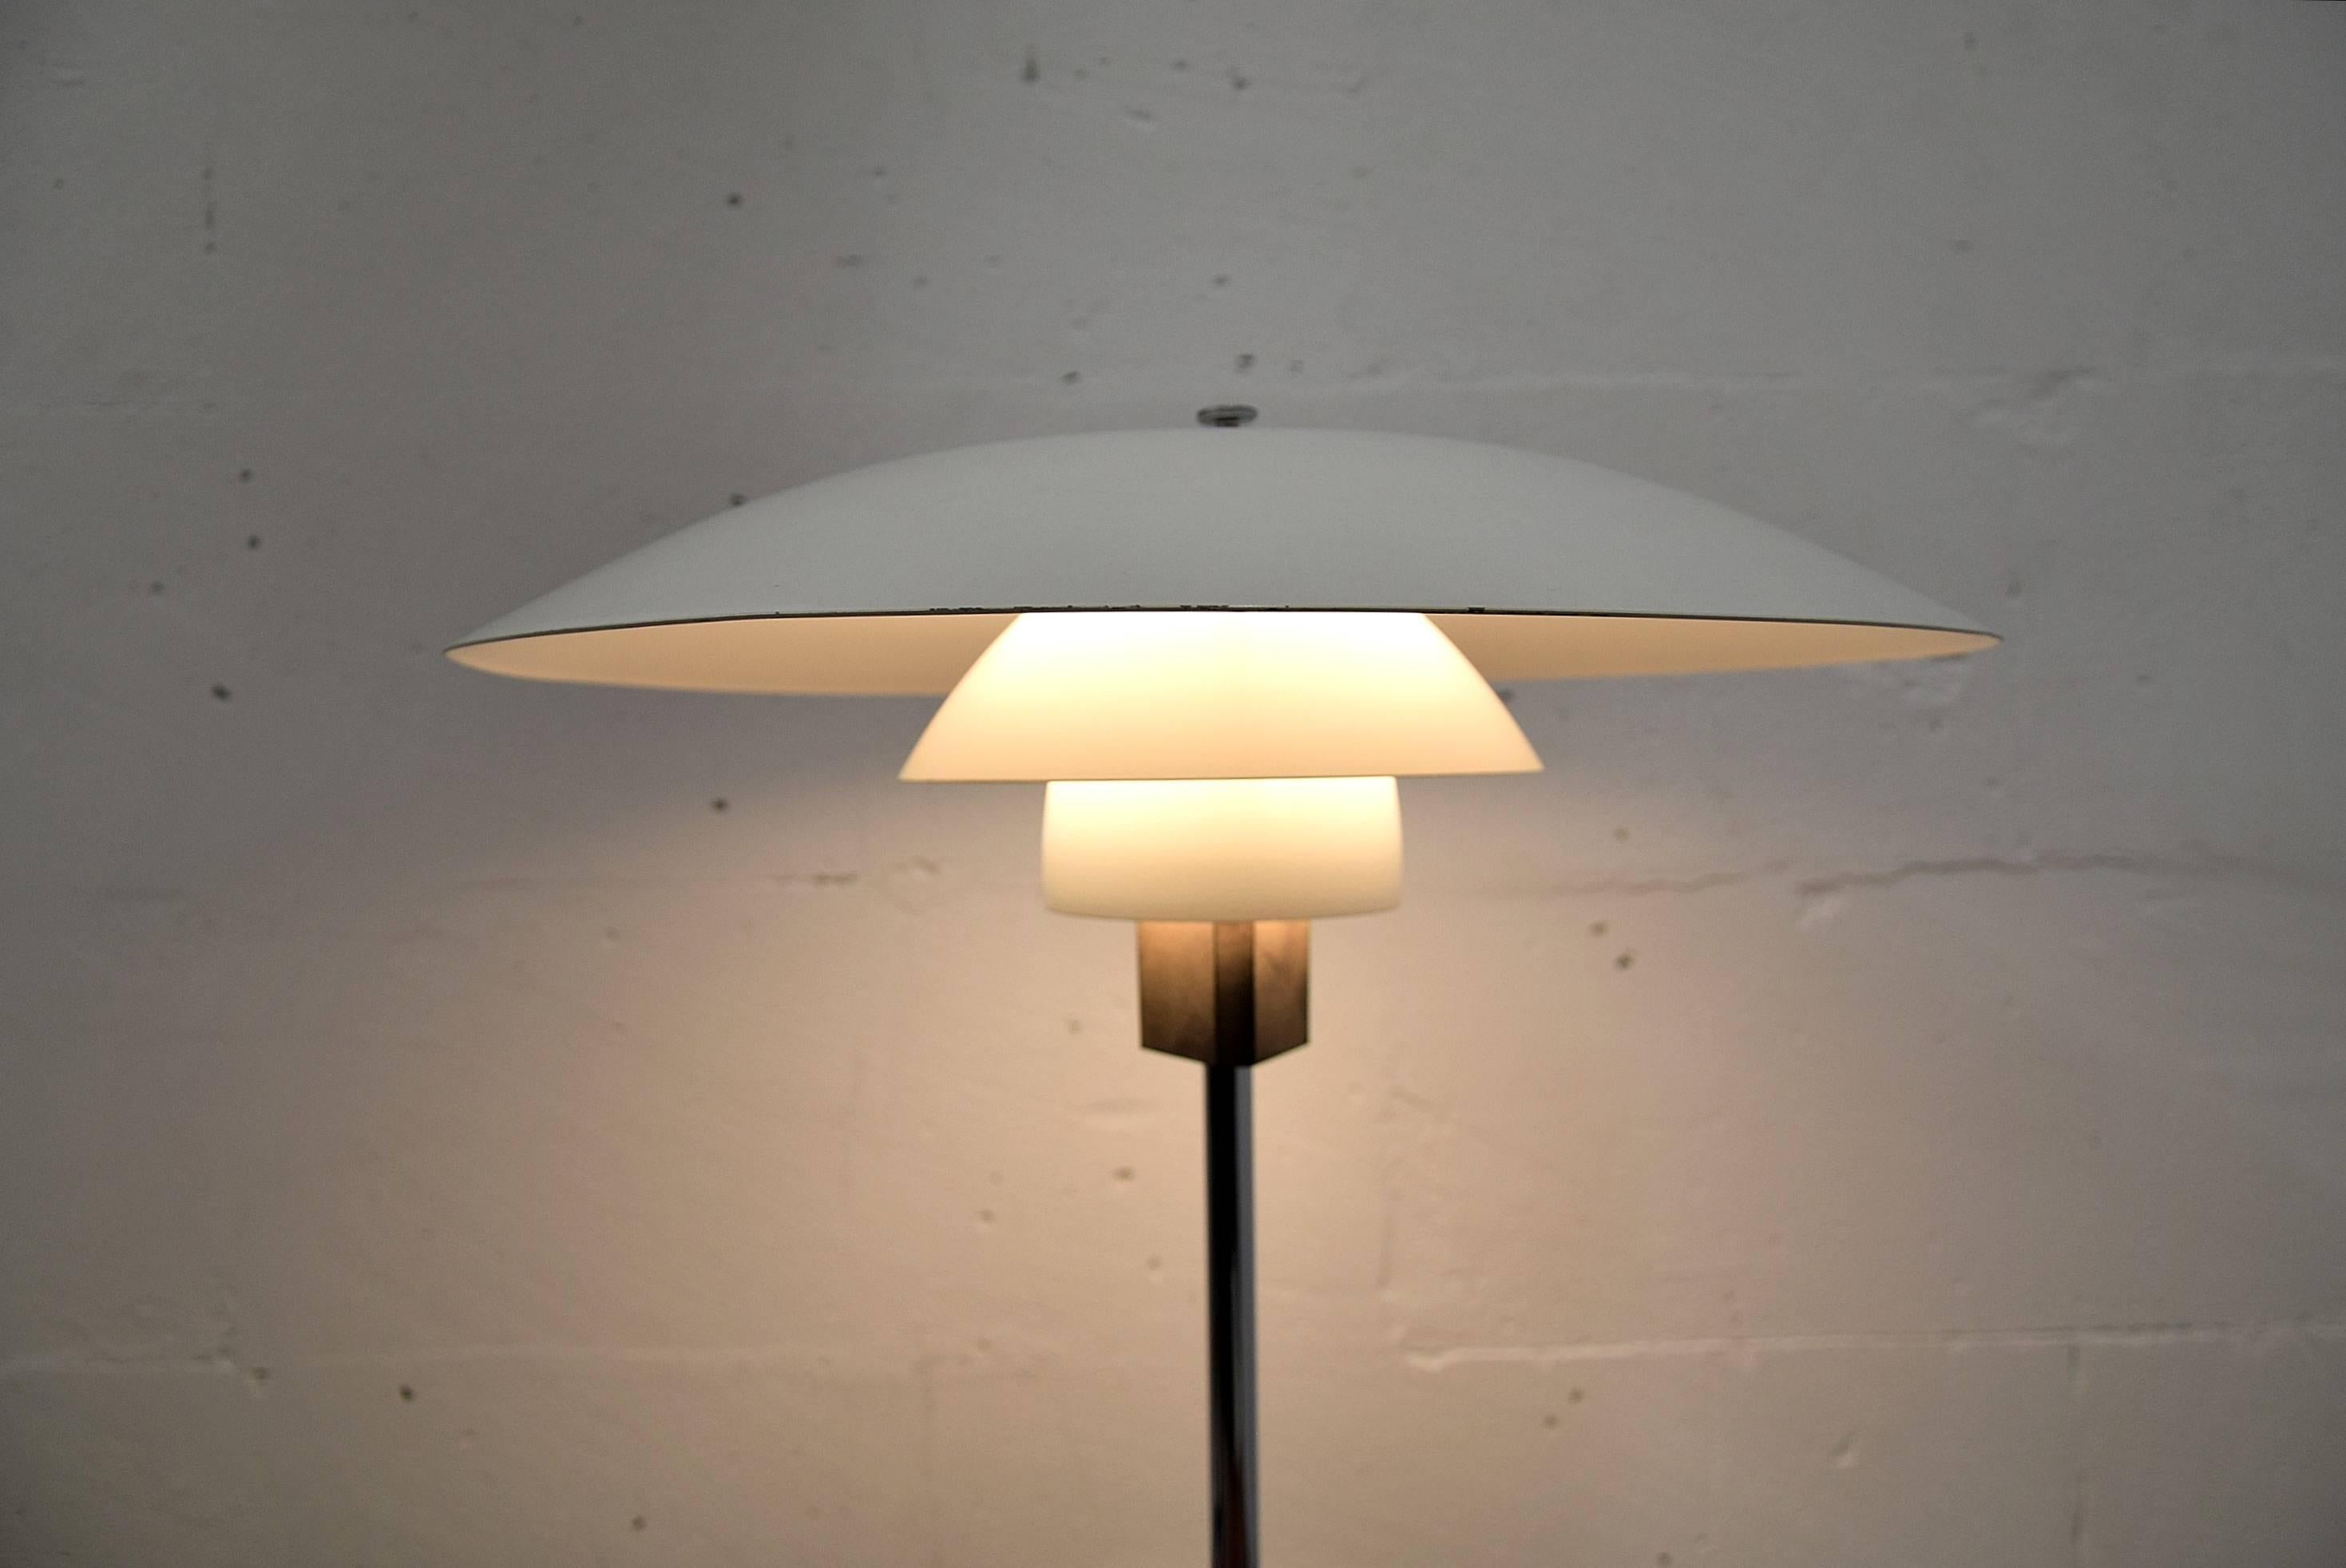 20th century table lamp Poul Henningsen for Louis Poulsen.
Mid-Century Modern design icon PH 3/4 designed by Poul Henningsen in the 1960s and produced by Louis Poulsen.

This master piece is in fantastic vintage condition.

Measurements: H.55 x D.45